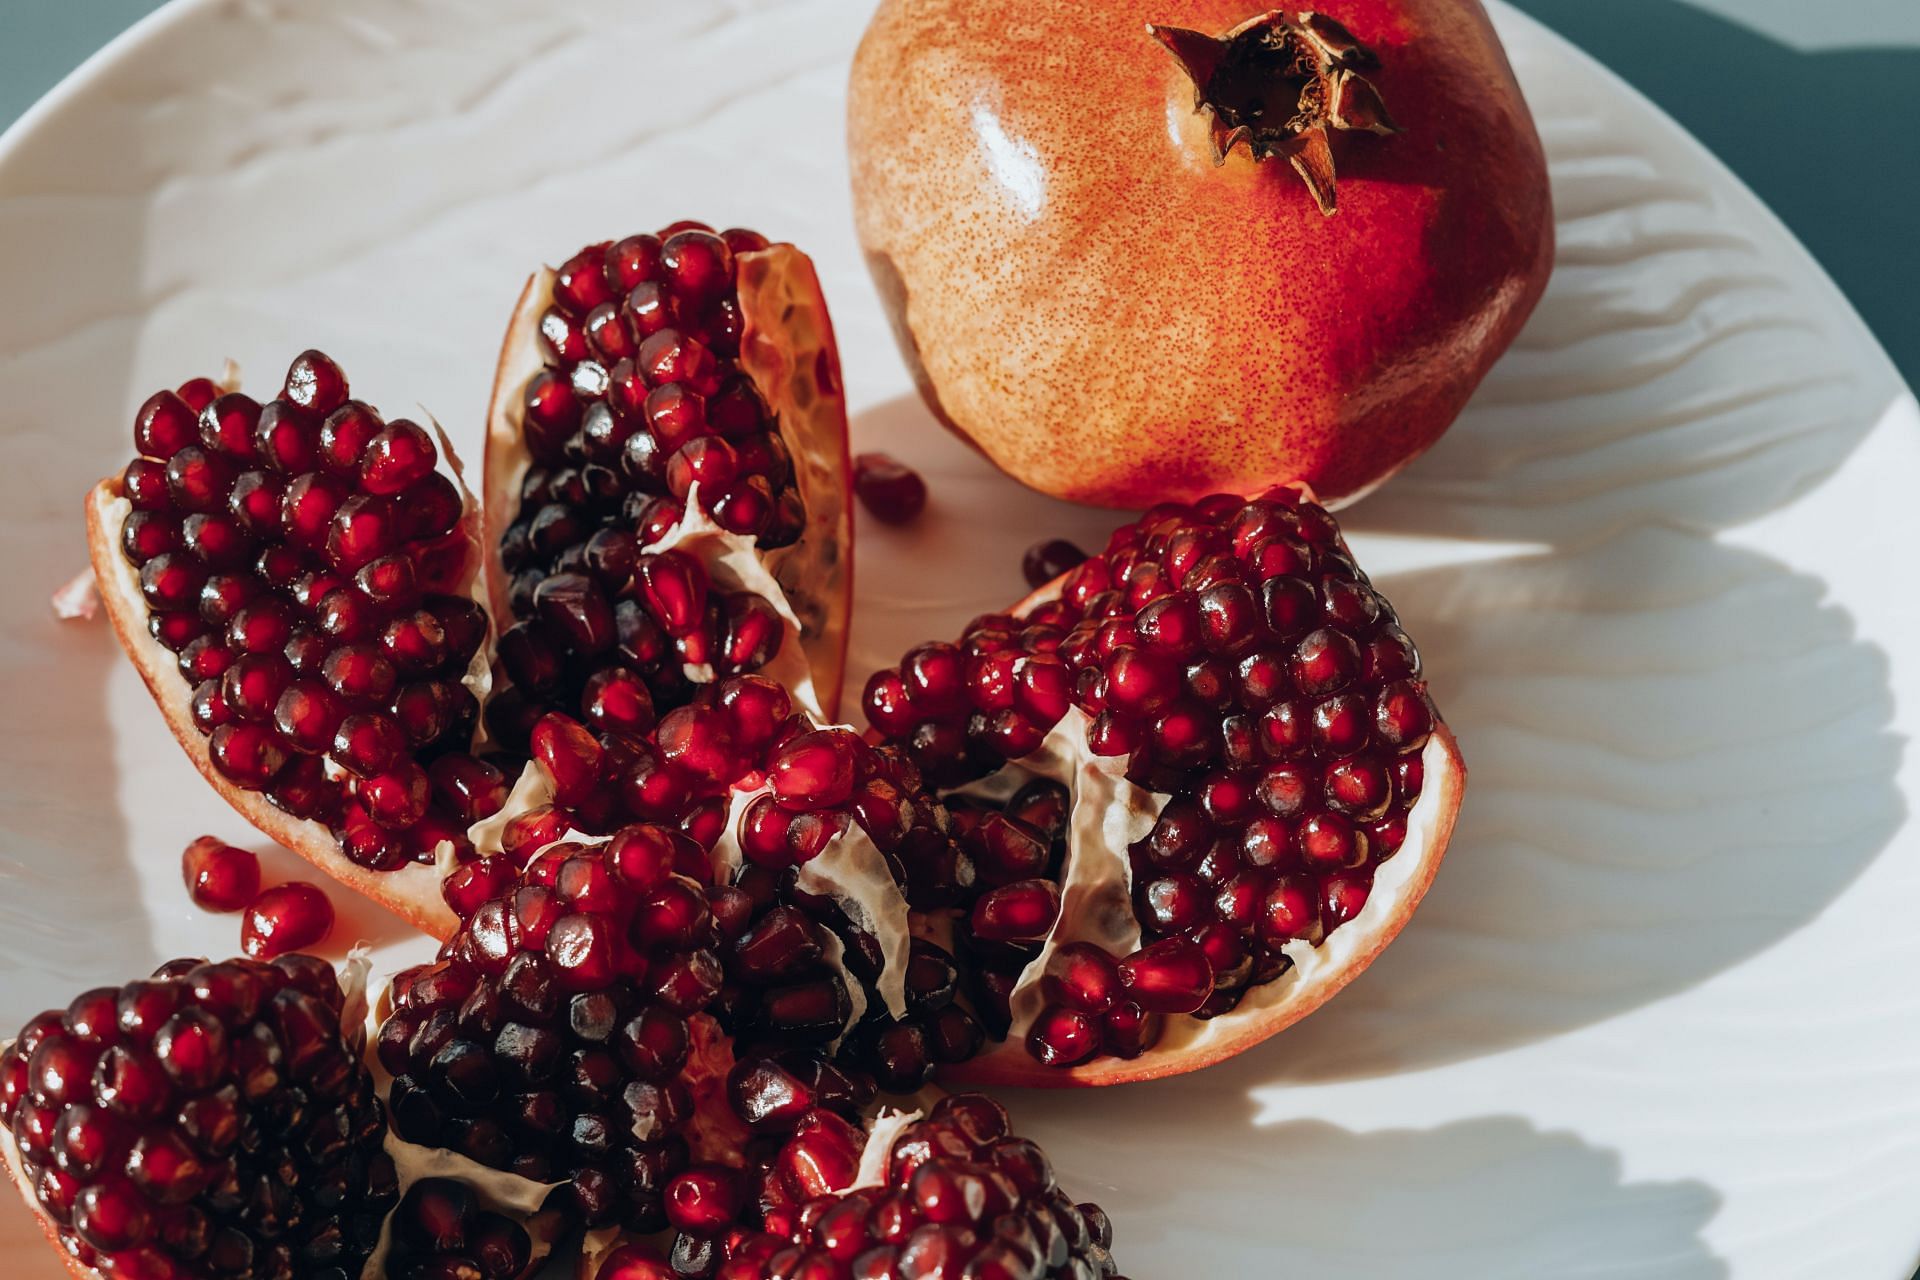 The juicy, ruby-red arils of pomegranate burst with health benefits (Image via Pexels)